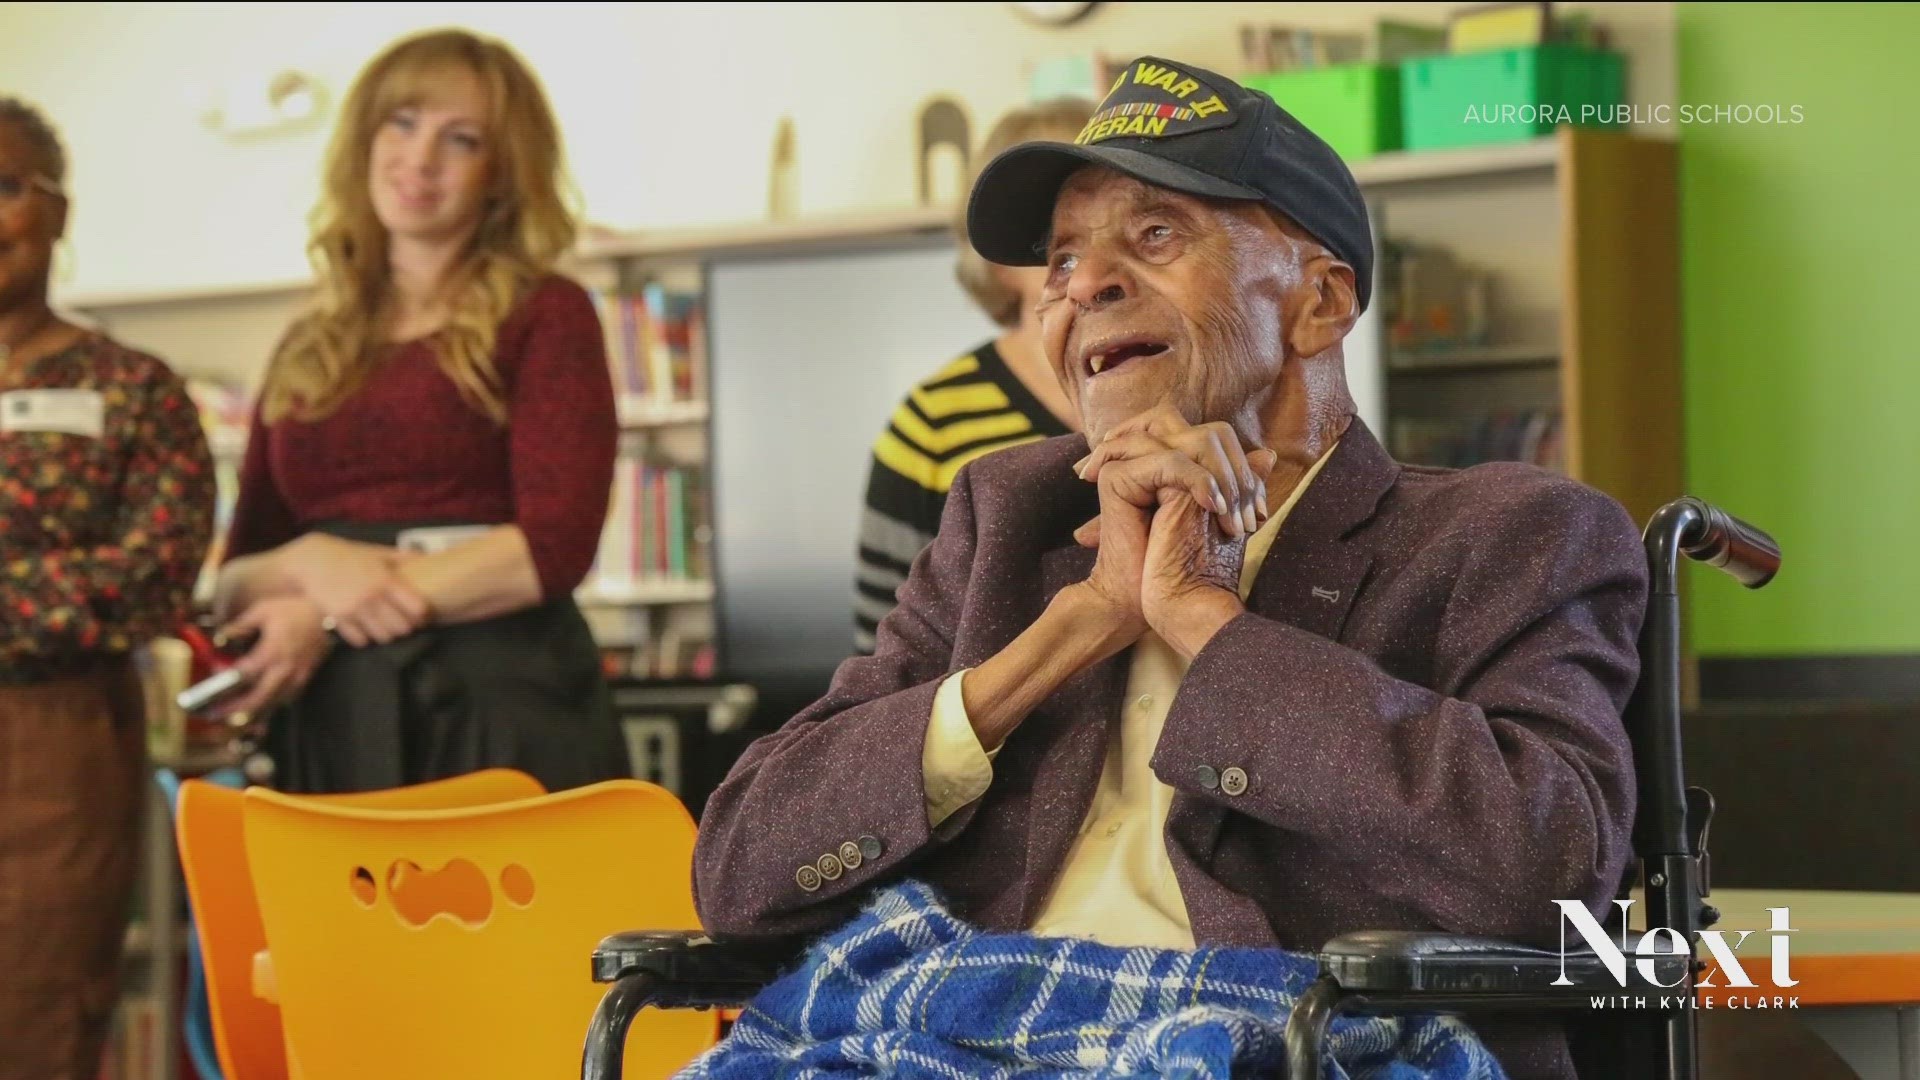 This week, students at the Charles Burrell Visual and Performing Arts Campus in Aurora celebrated the 103rd birthday of their namesake: Jazz icon Charles Burrell.